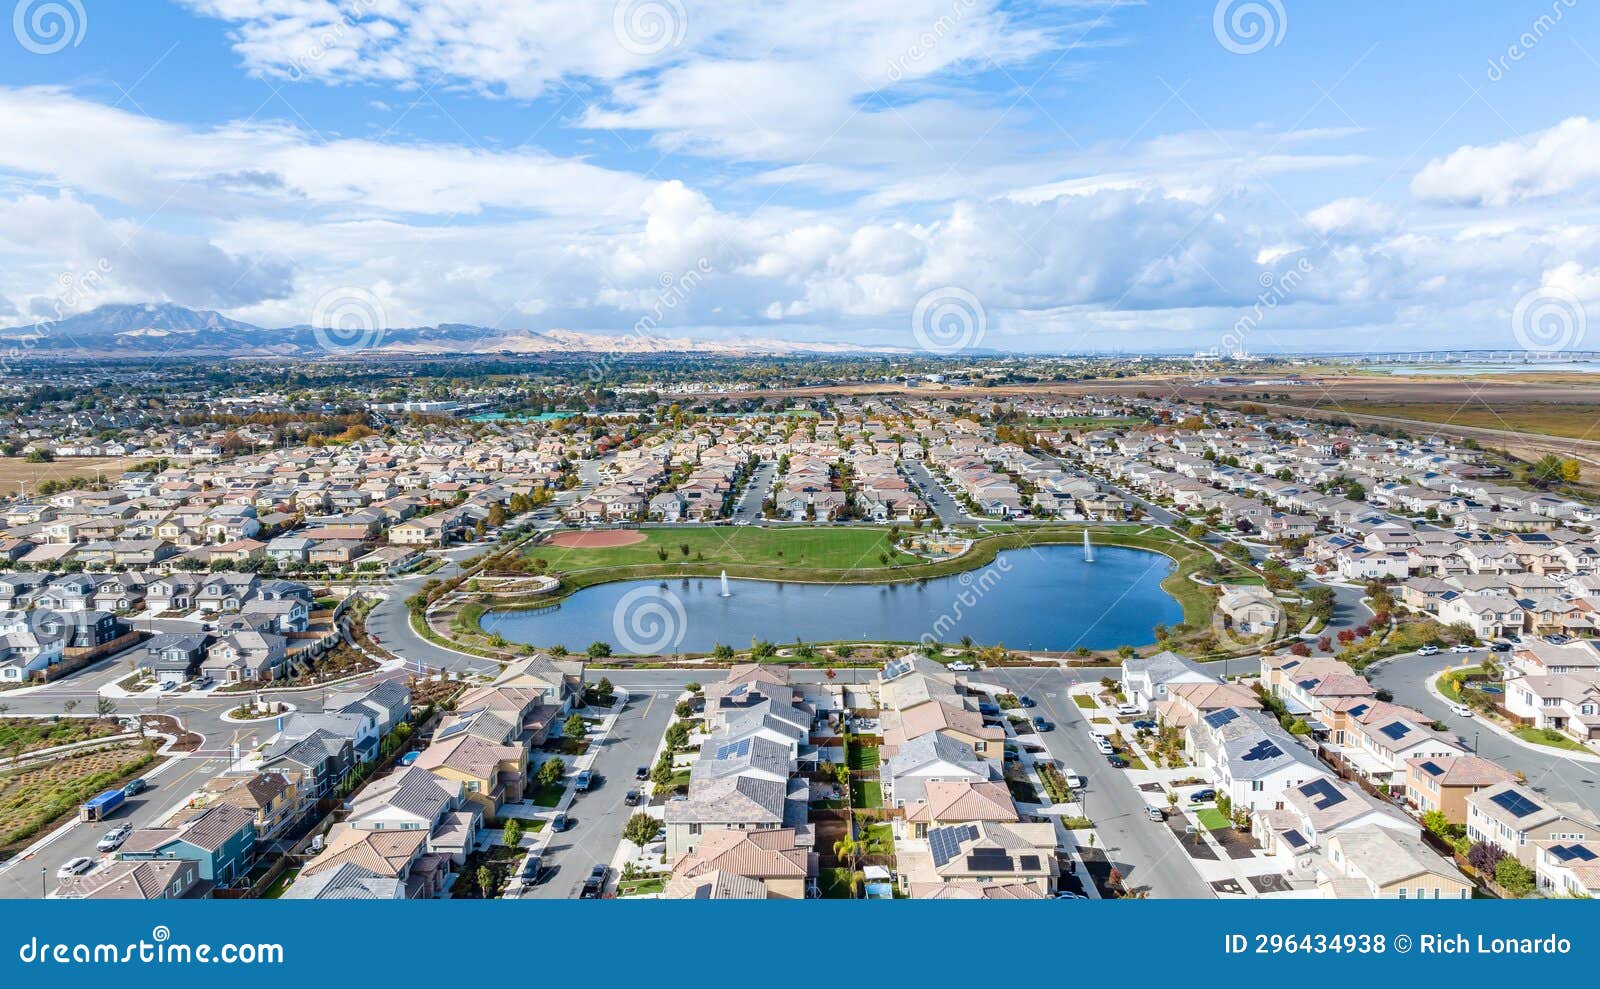 a drone view of a community in oakley, california with a lake in the center